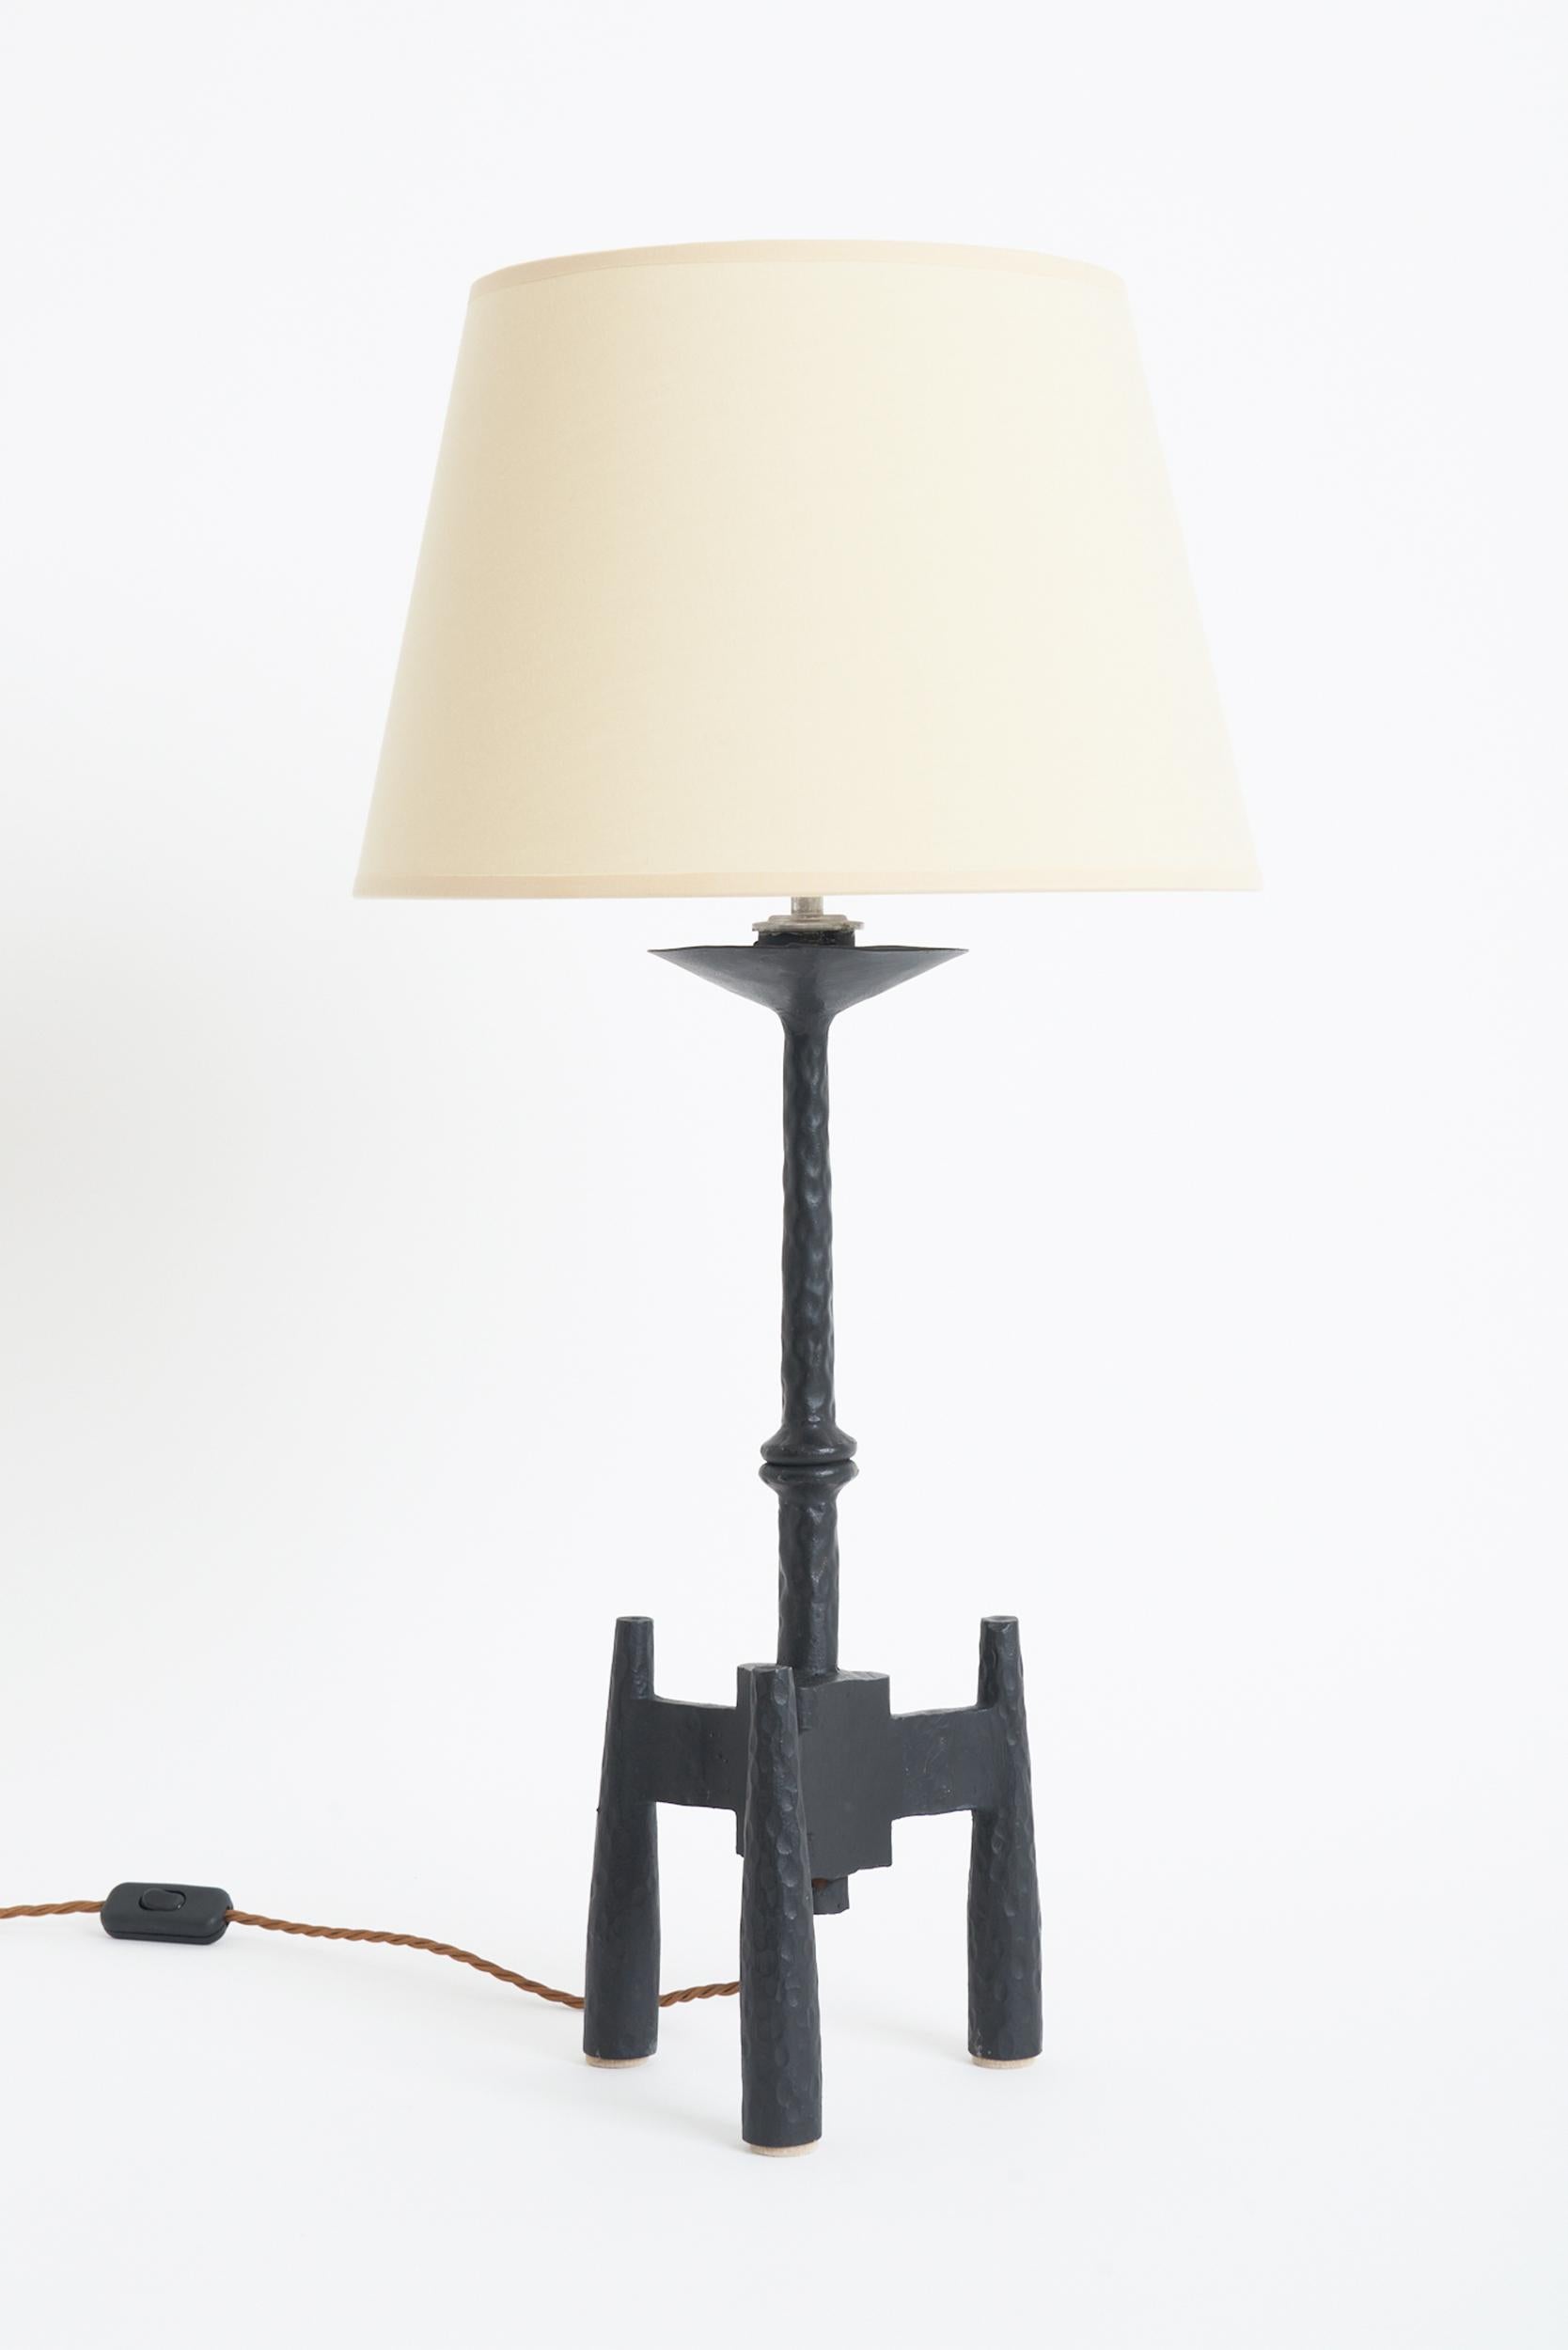 A Brutalist wrought iron table lamp 
Spanish, mid 20th Century 
With the shade: 71 cm high by 35.5 cm diameter 
Lamp base only: 53 cm high by 19 cm diameter